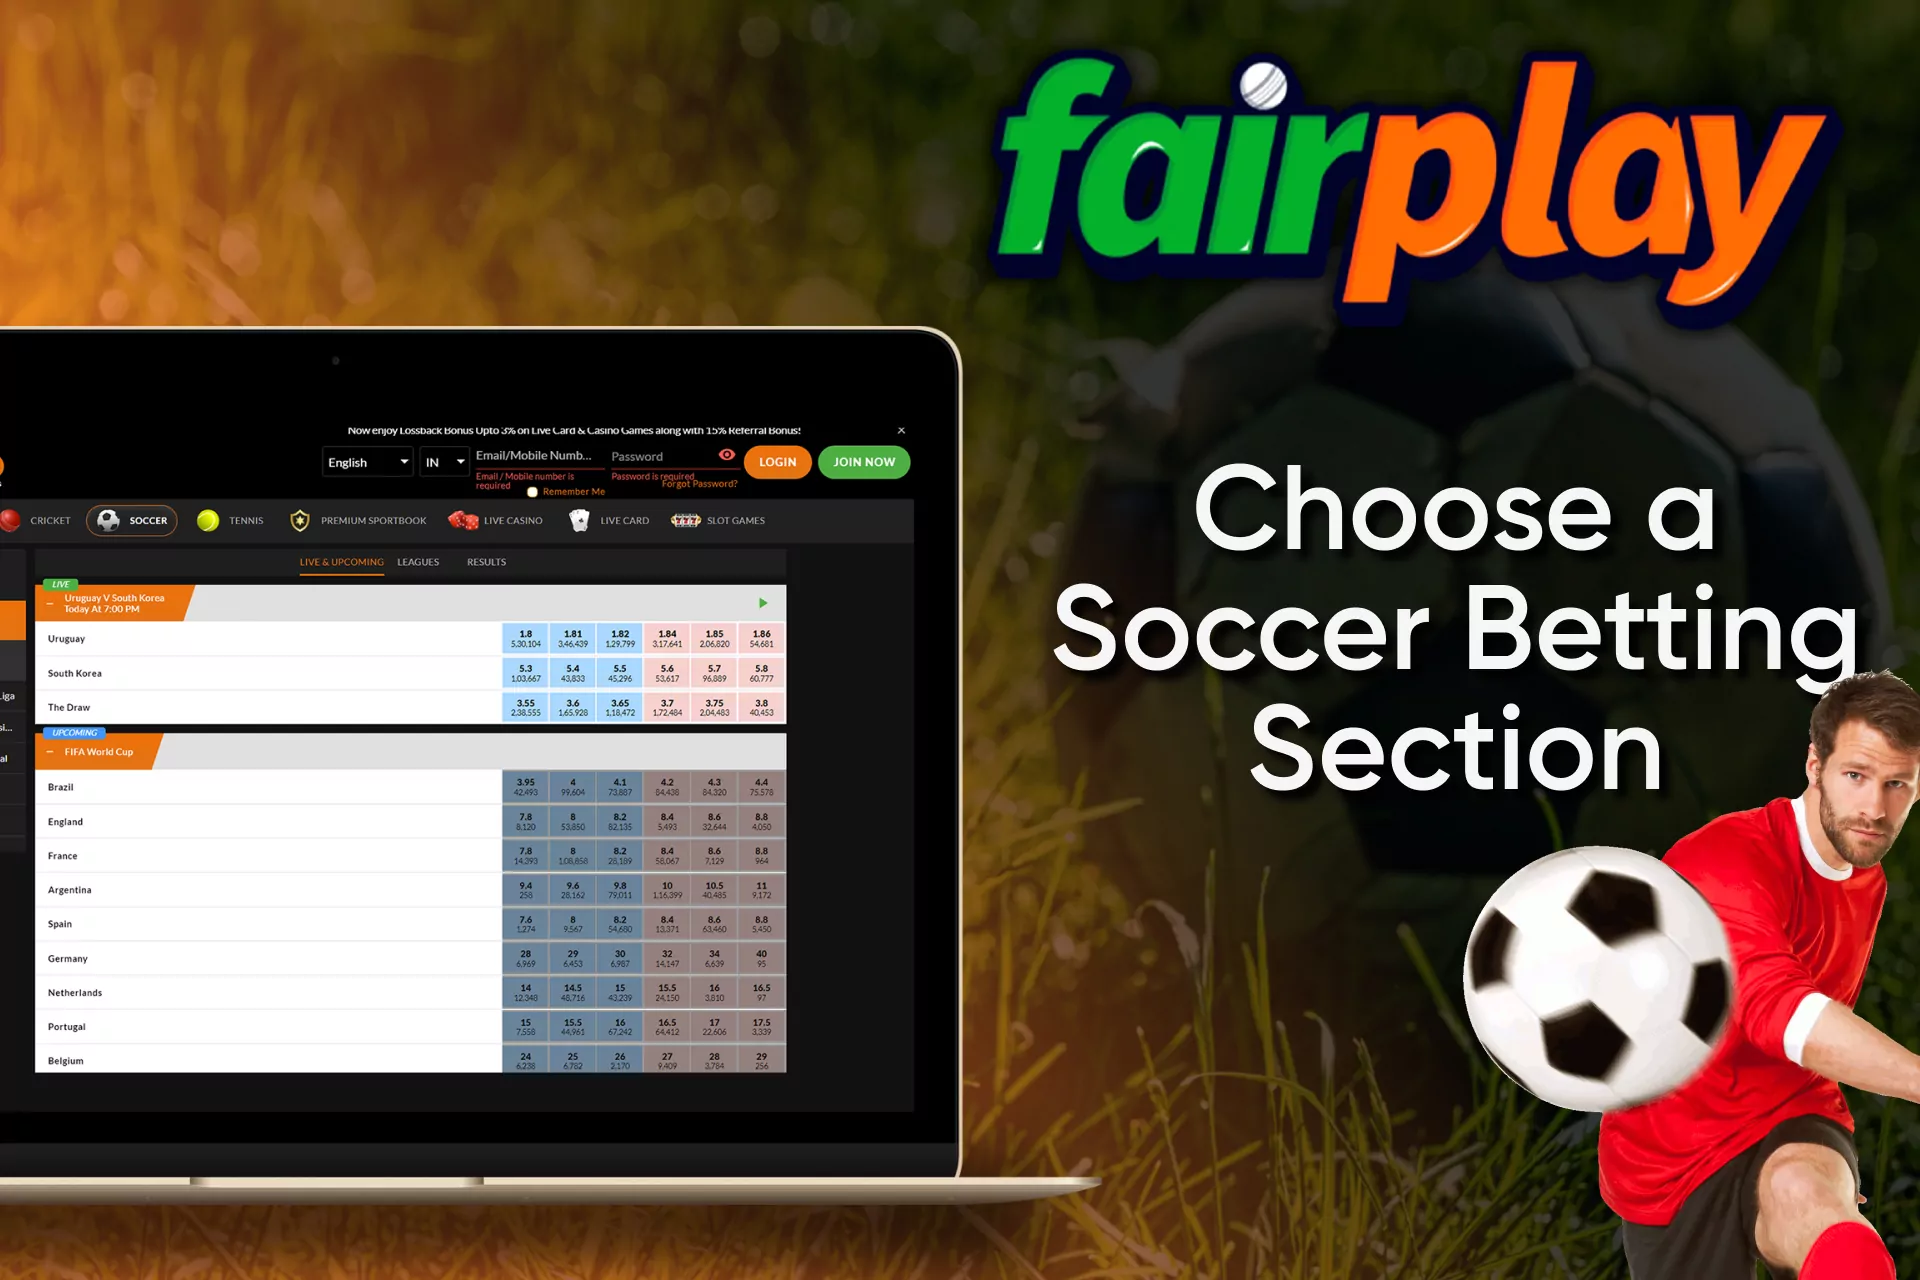 Find the soccer section on the Fairplay site.